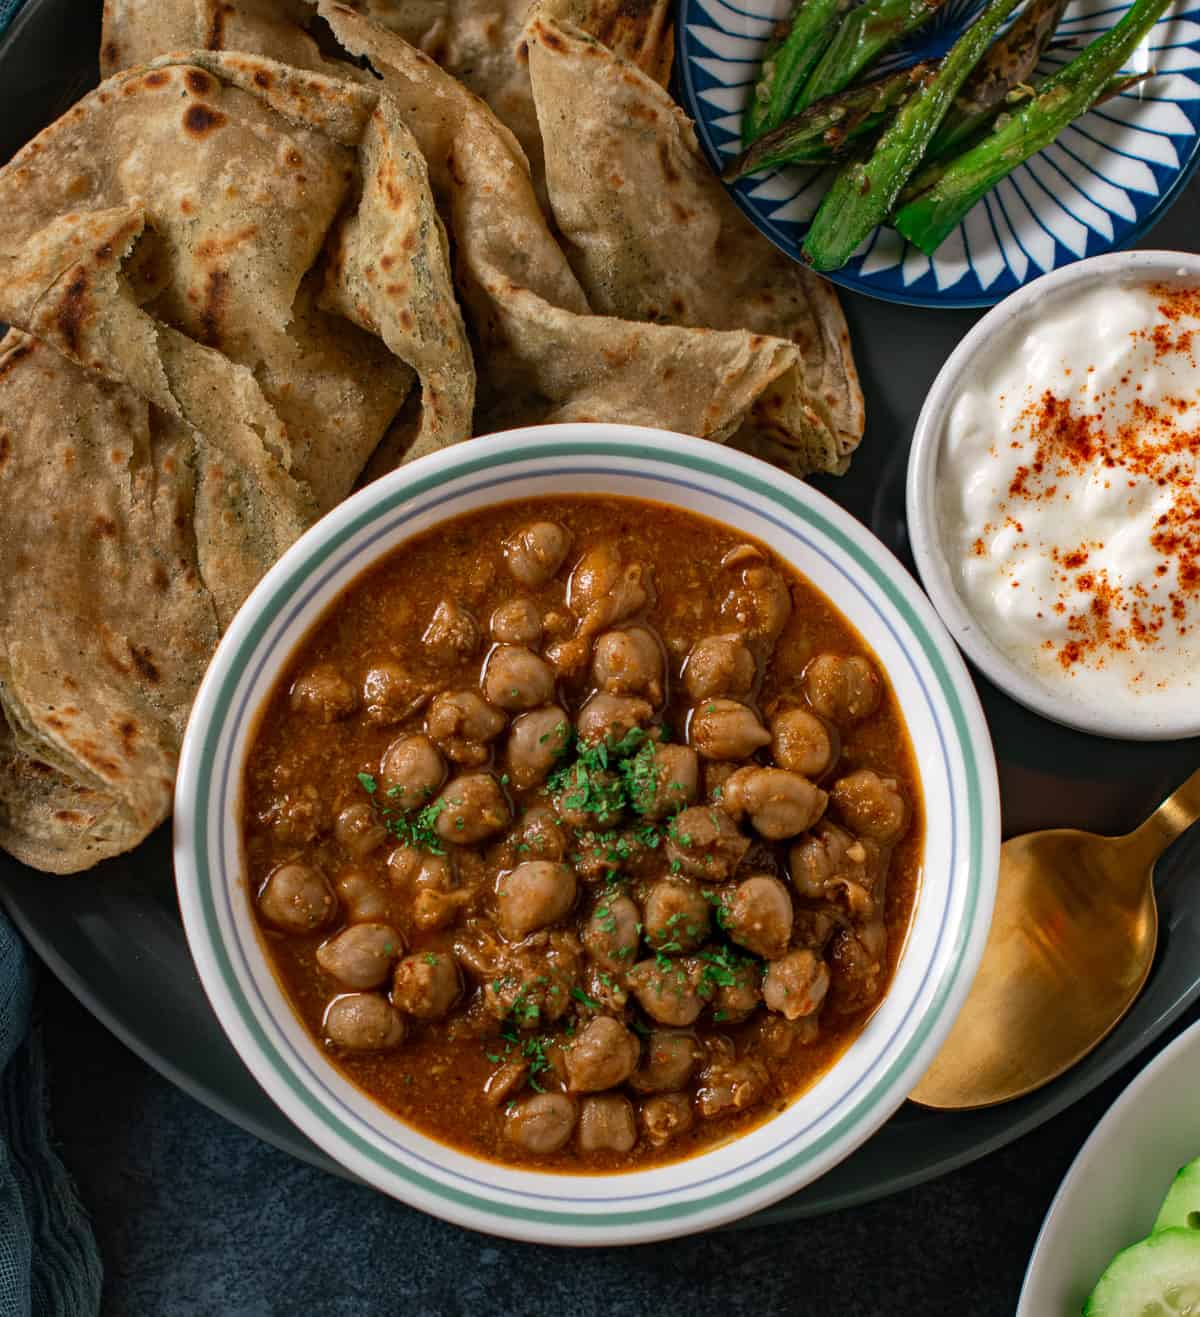 Chole without onion and garlic ssrved on a plate